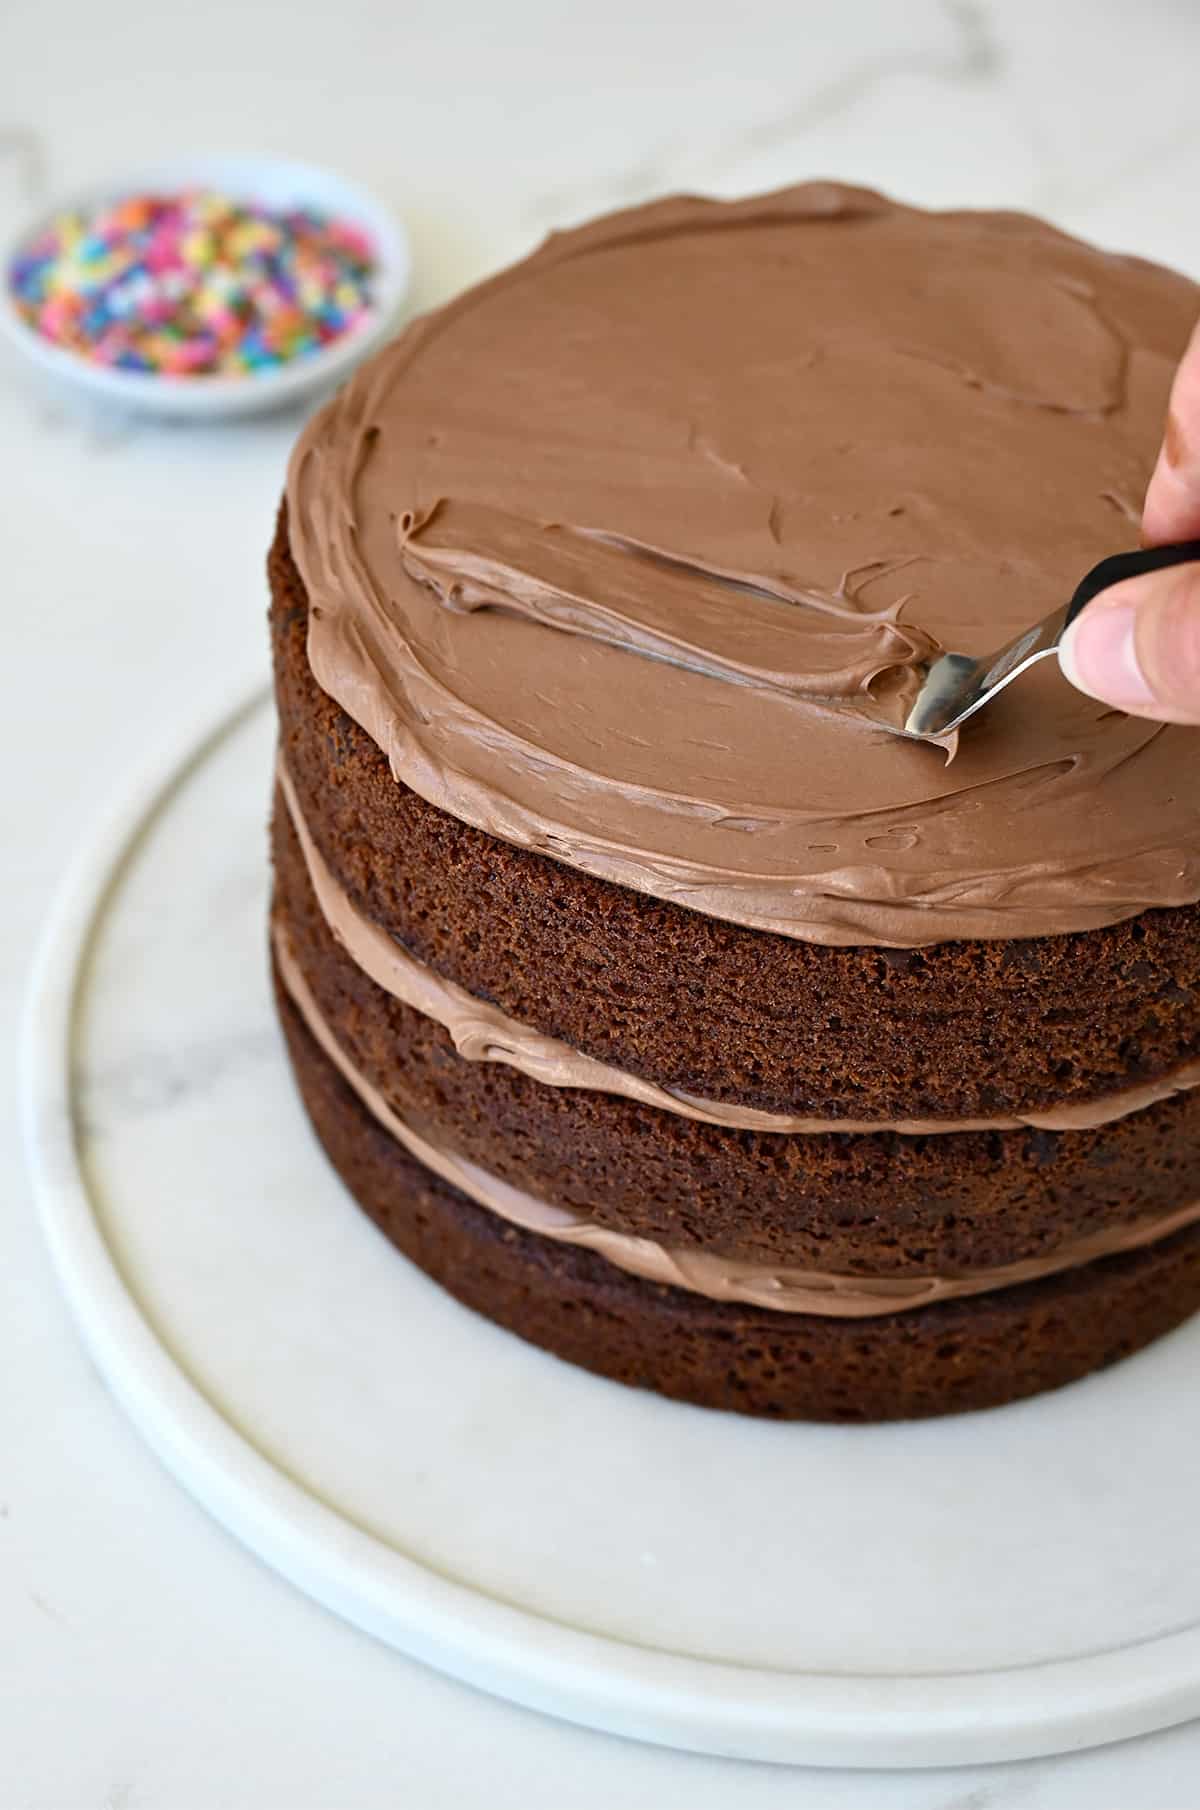 A hand holding an offset spatula spreads coffee buttercream to the top of a three-layer chocolate cake.